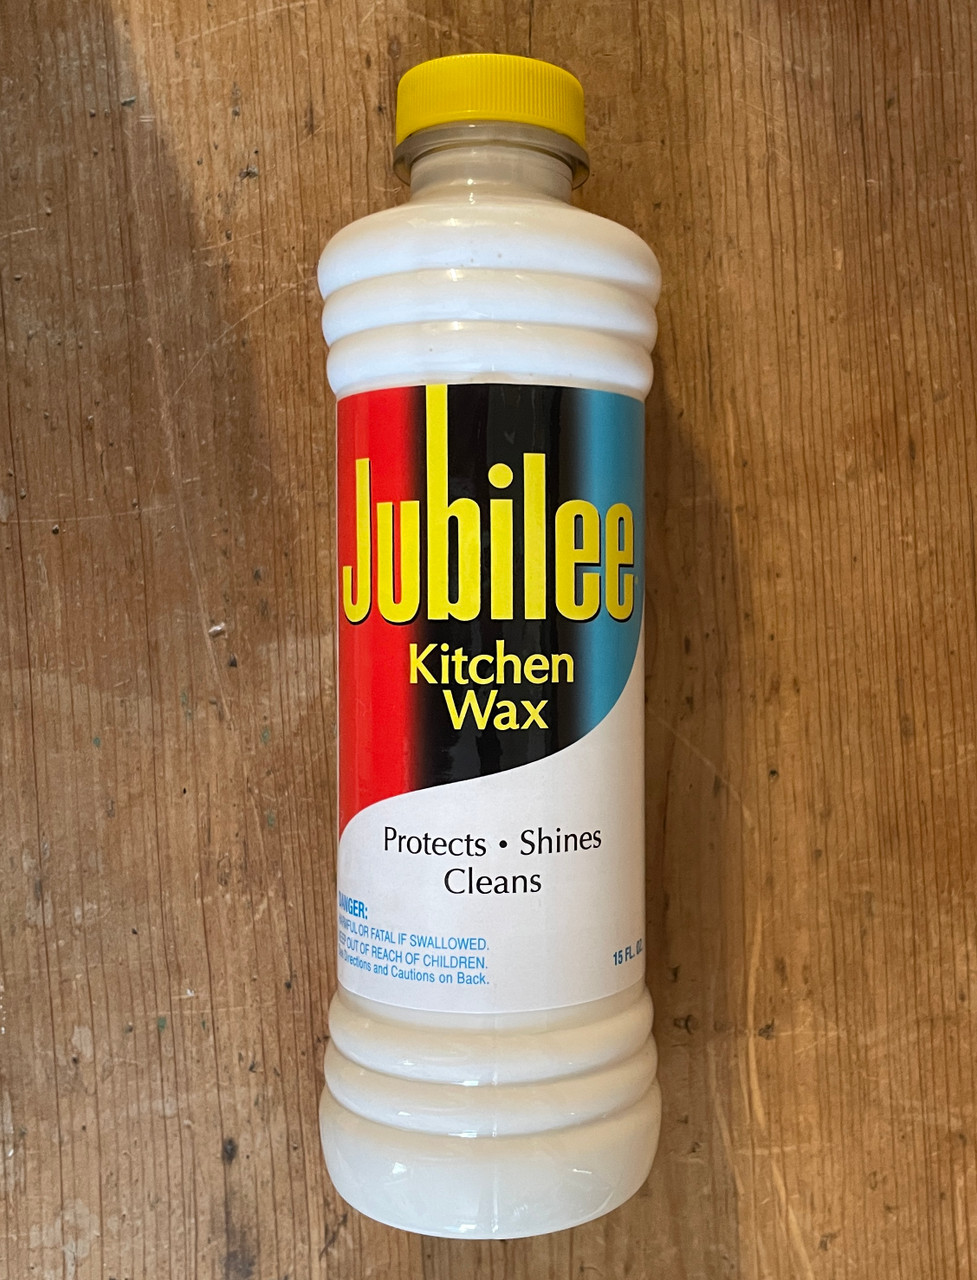 Jubilee Kitchen Cleaning Wax Reviews